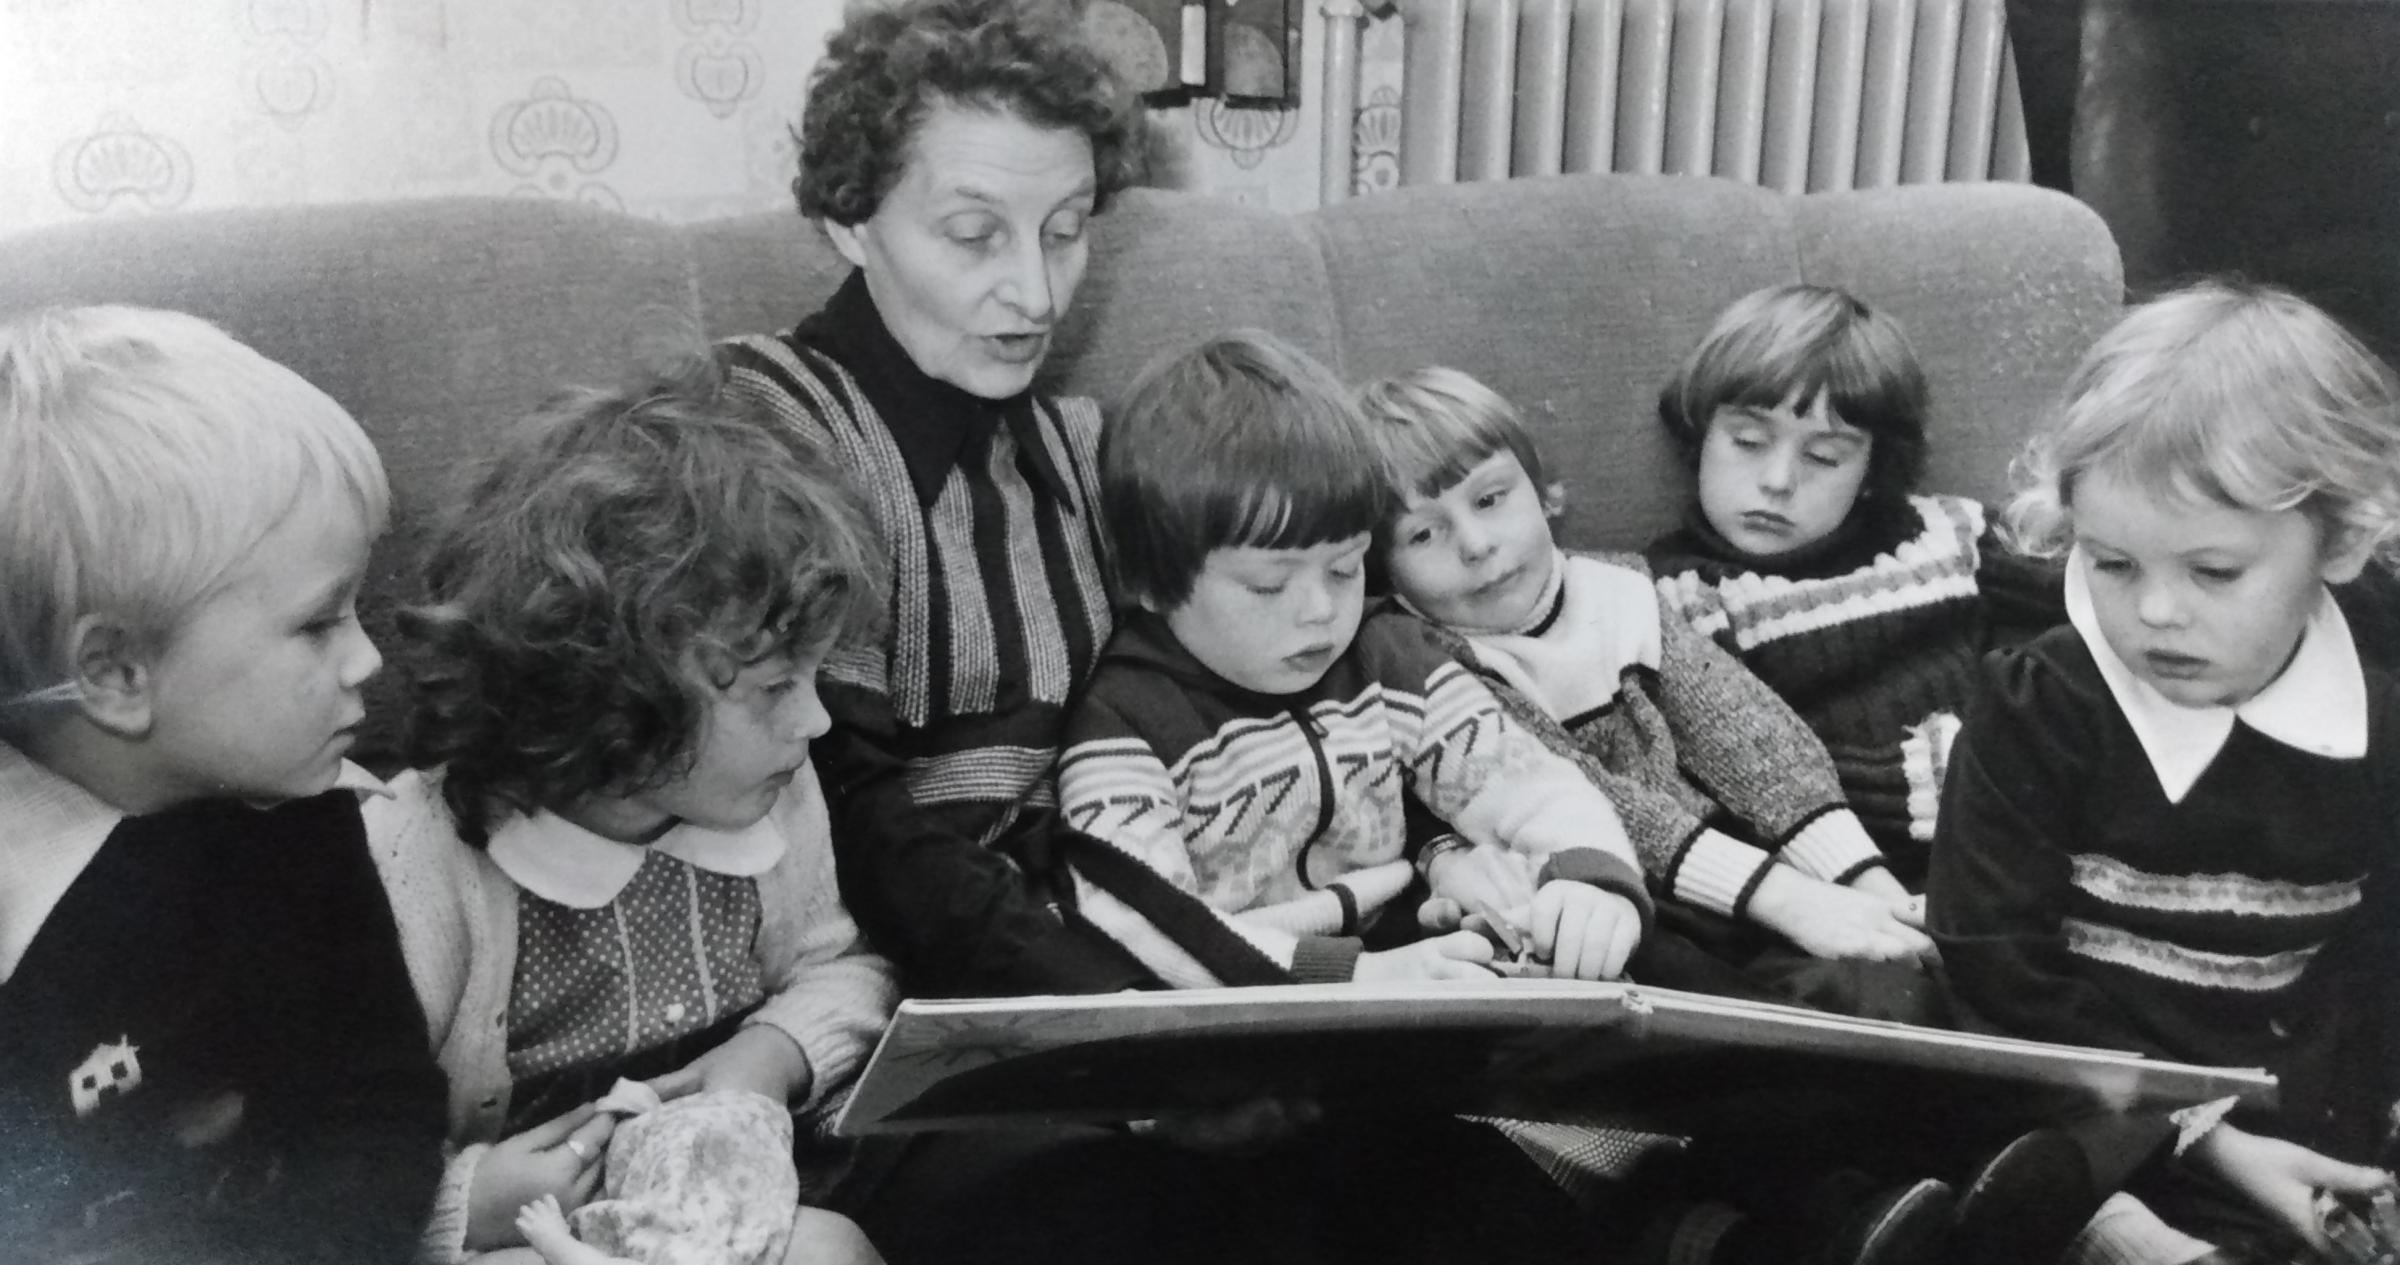 Kind-hearted Margaret Packman donated more than £200 to the city’s Hillborough Child Centre for under-privileged youngsters in the city in 1978. She is pictured ready to some of the children from their favourite storybook